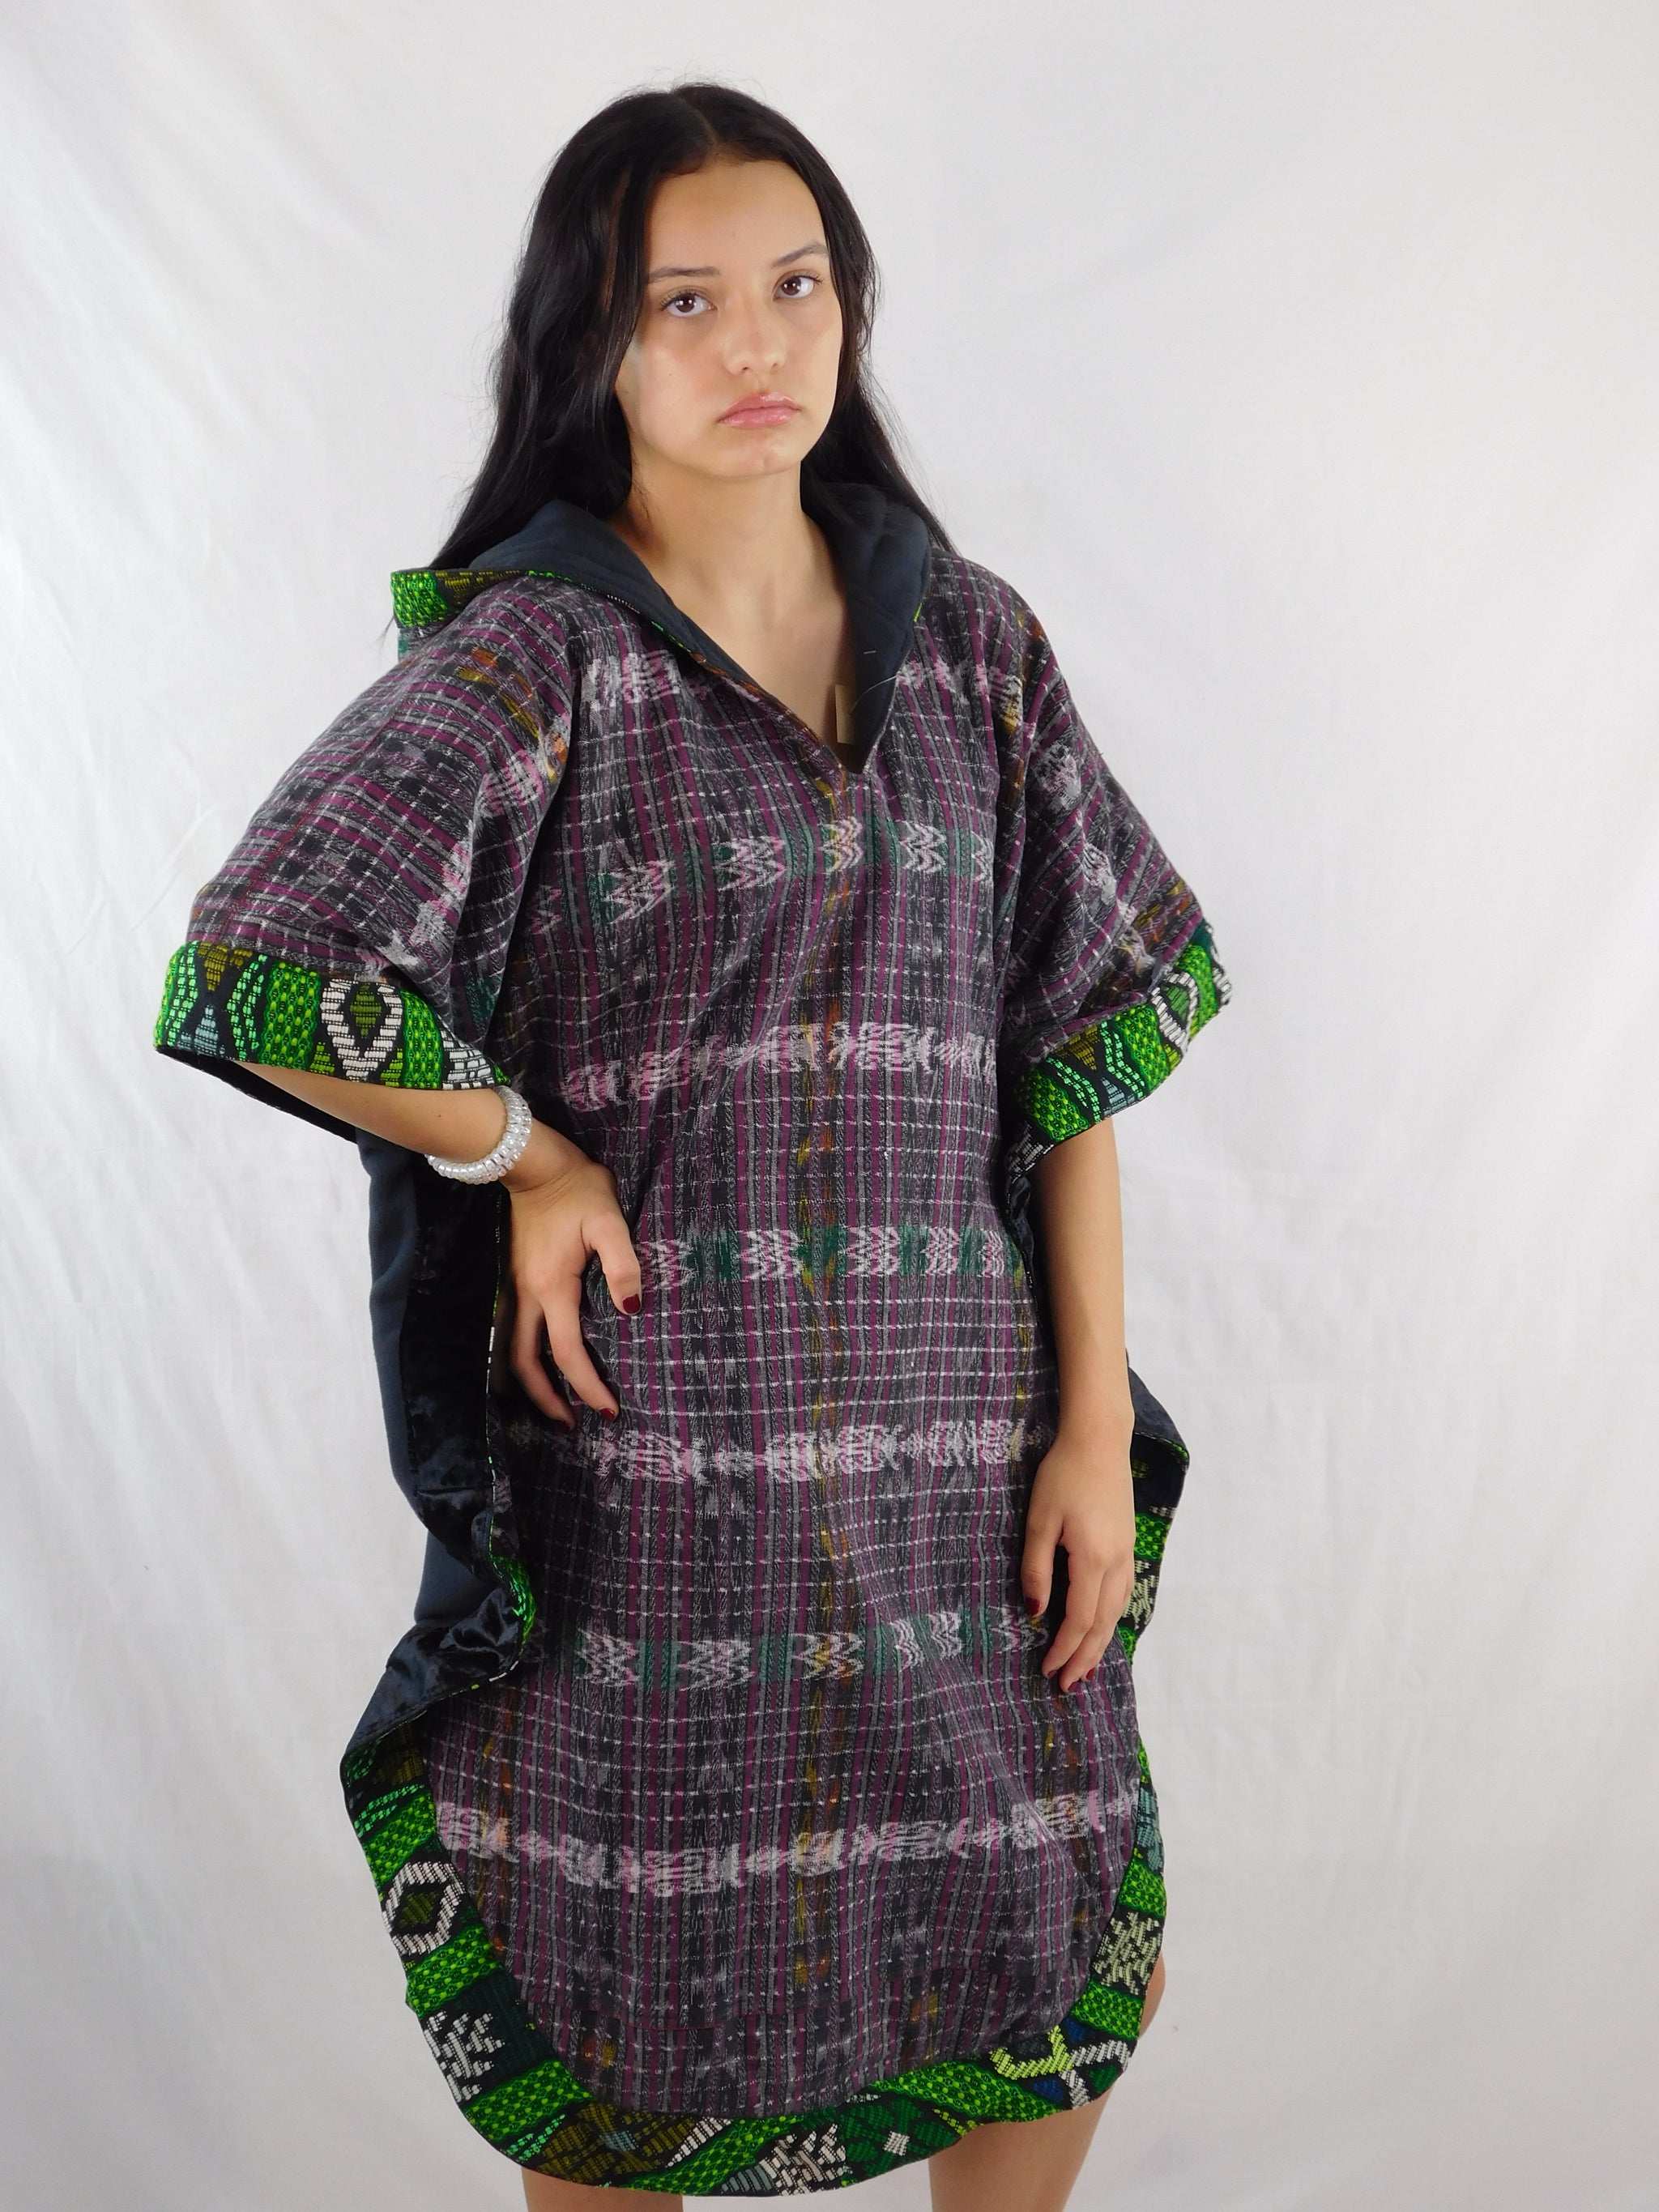 Hand-Woven Hooded Poncho